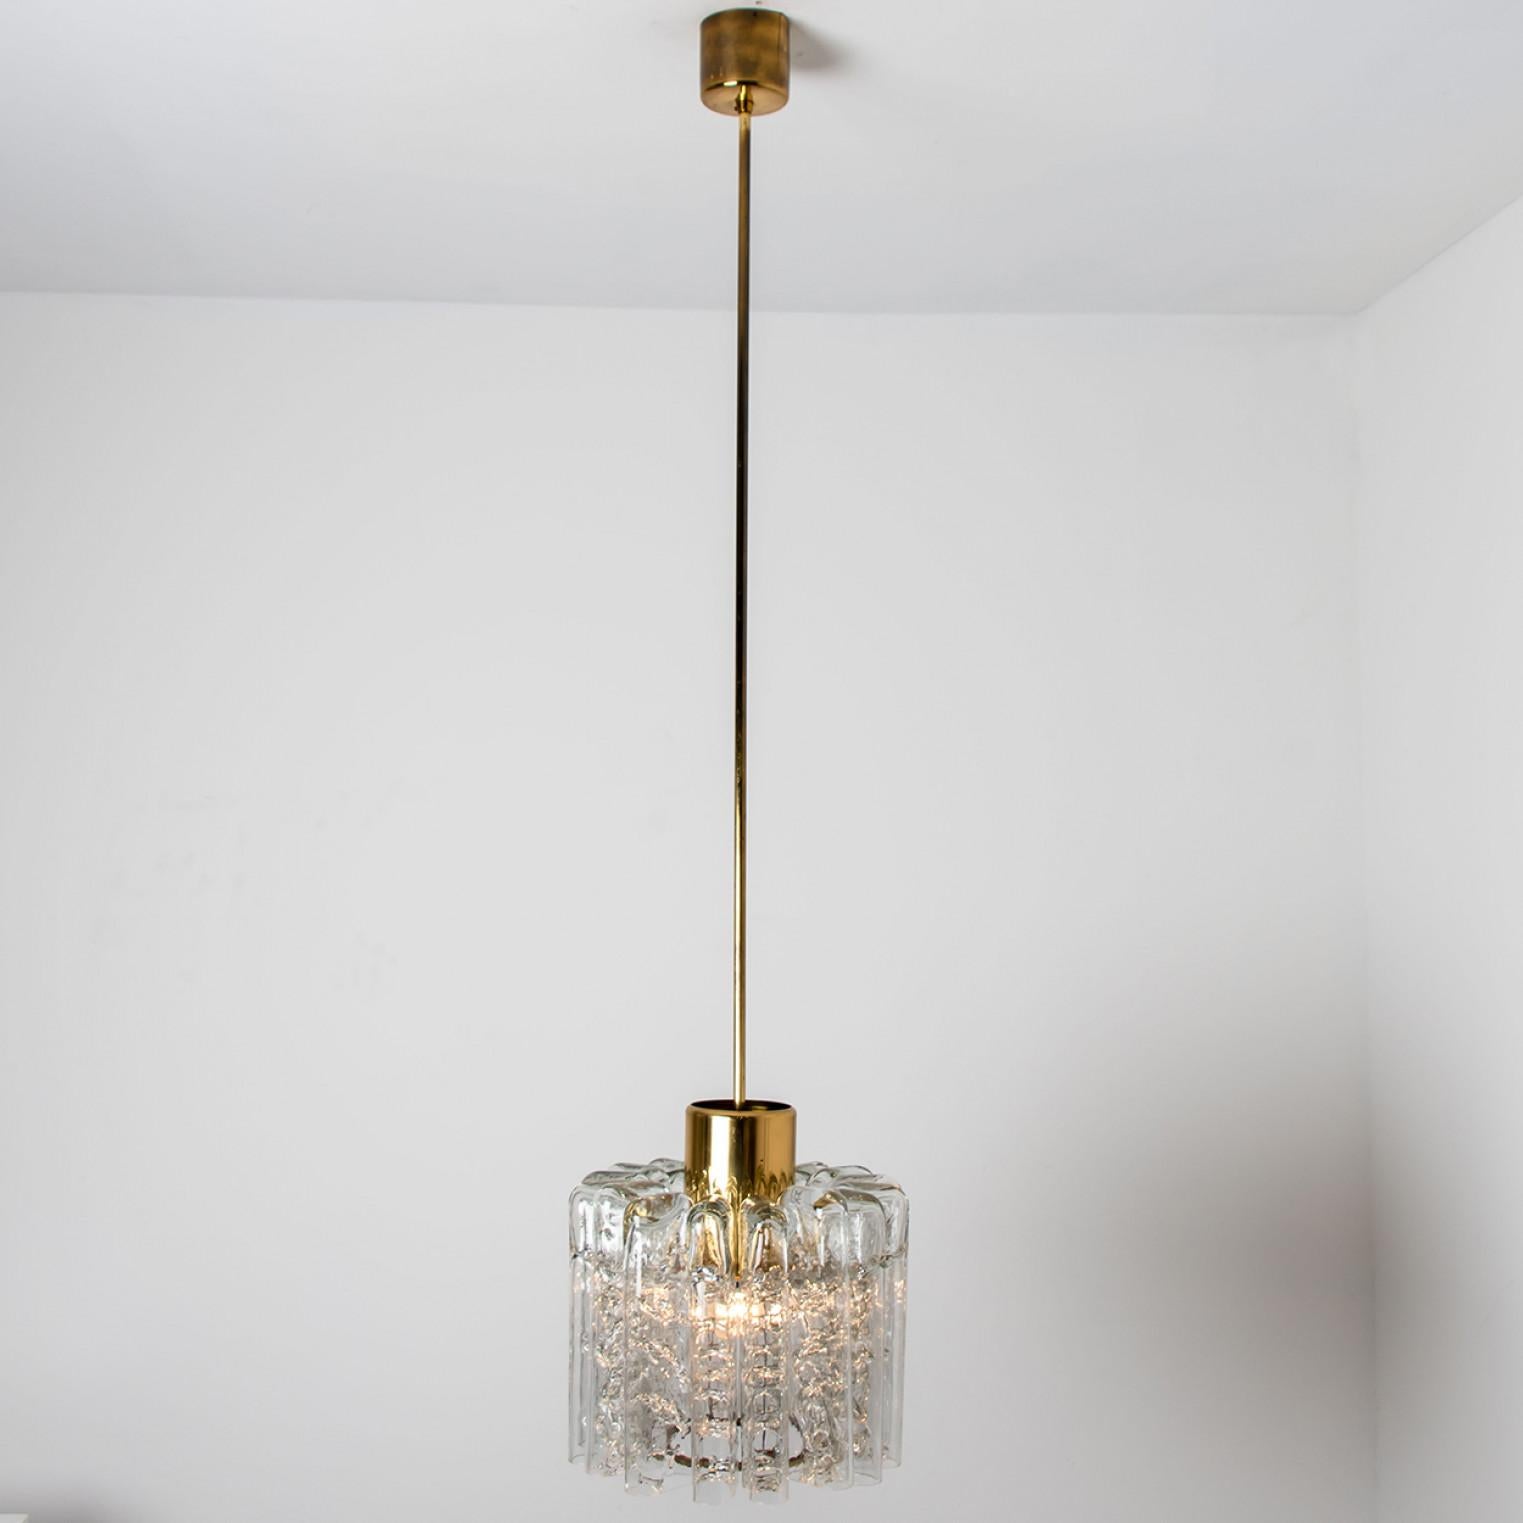 1 of the 2 Round Textured Clear Glass Doria Pendant Lamp, 1960s In Good Condition For Sale In Rijssen, NL